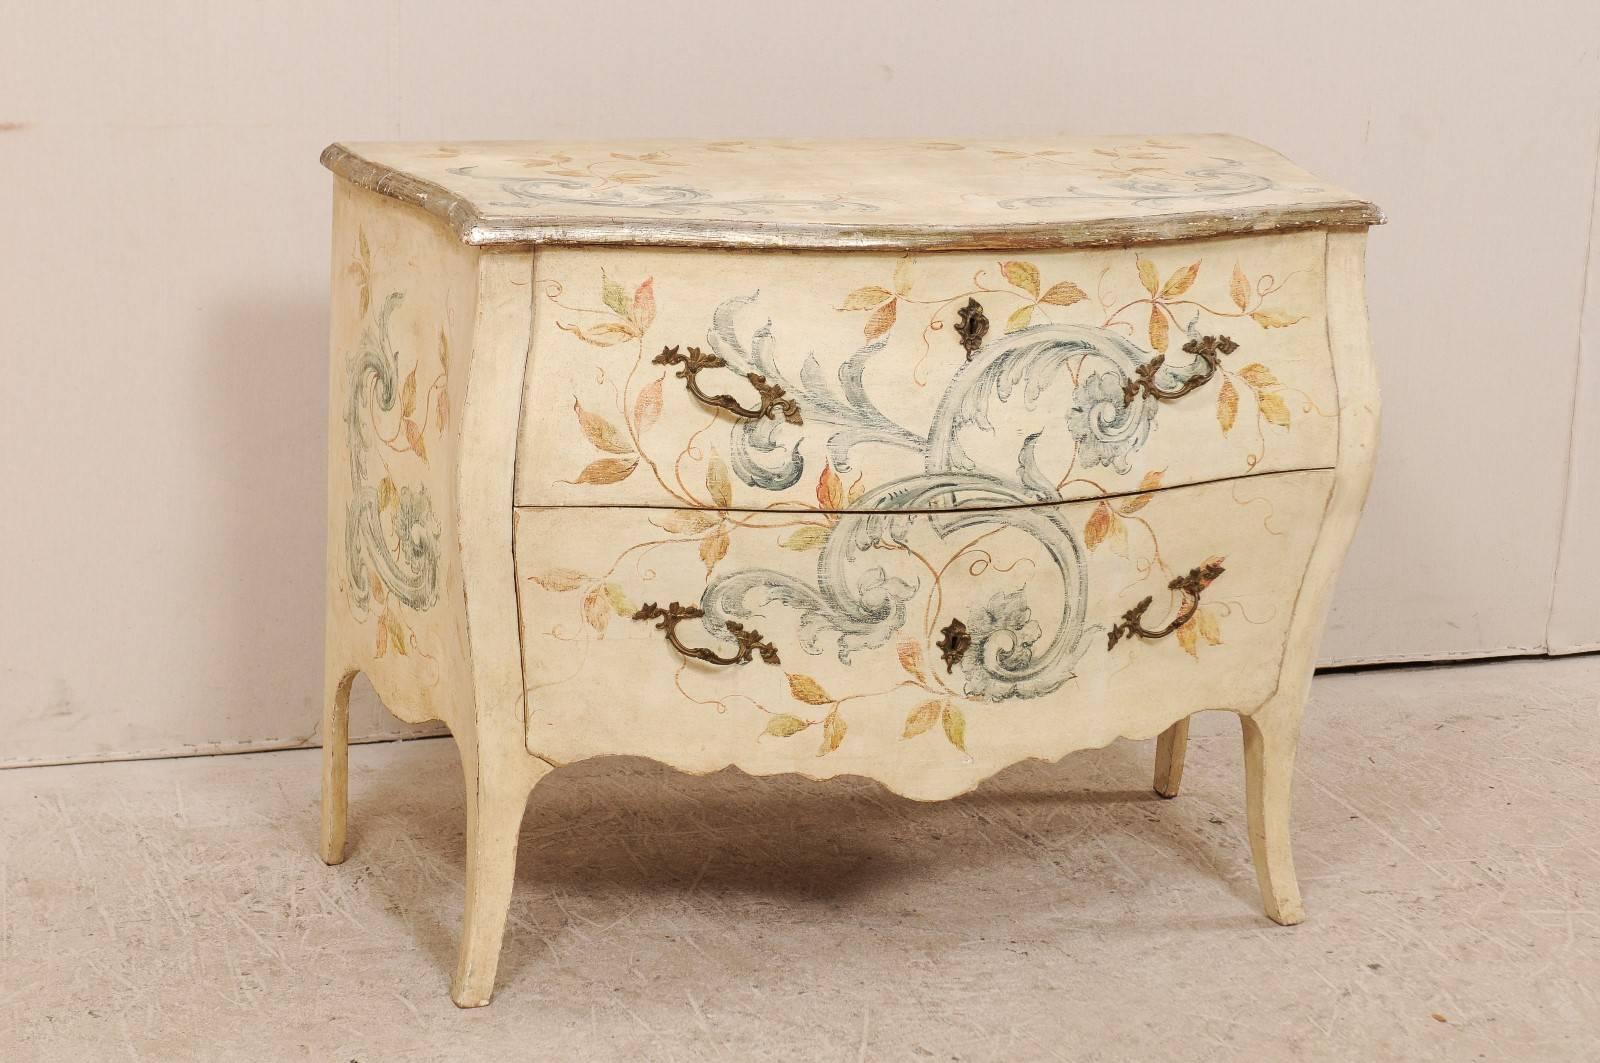 Carved Italian Hand-Painted Early 20th Century Bombé Chest of Drawers in Cream Color